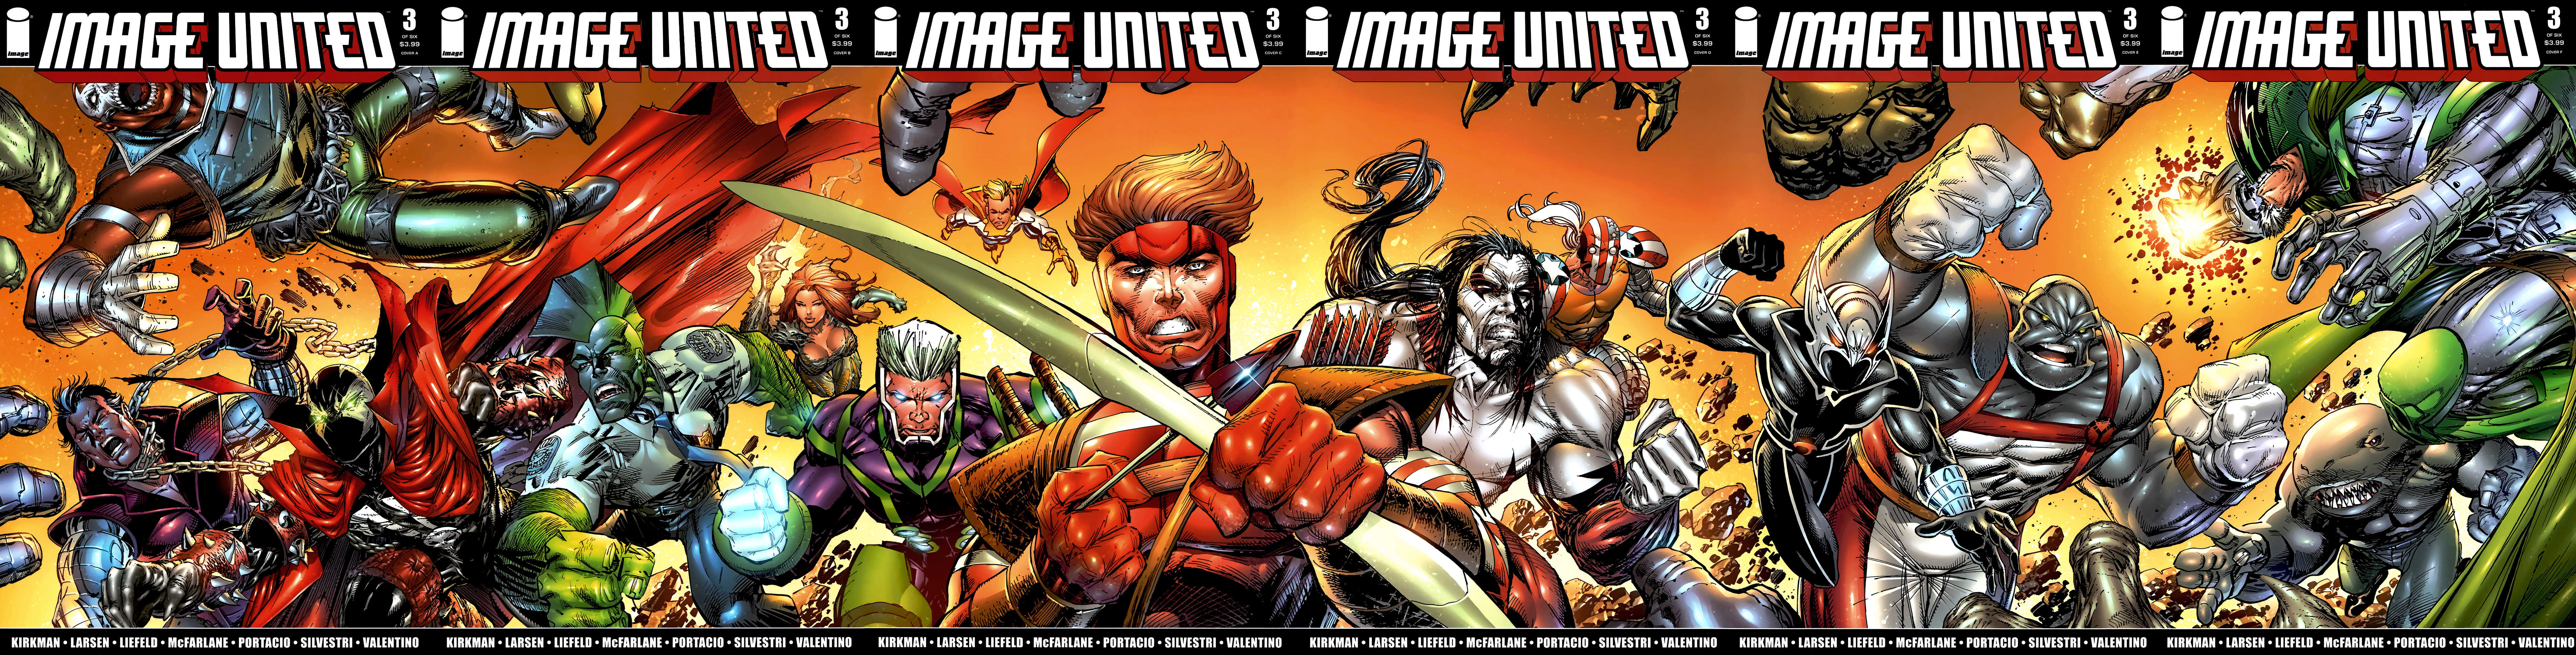 Read online Image United comic -  Issue #3 - 1